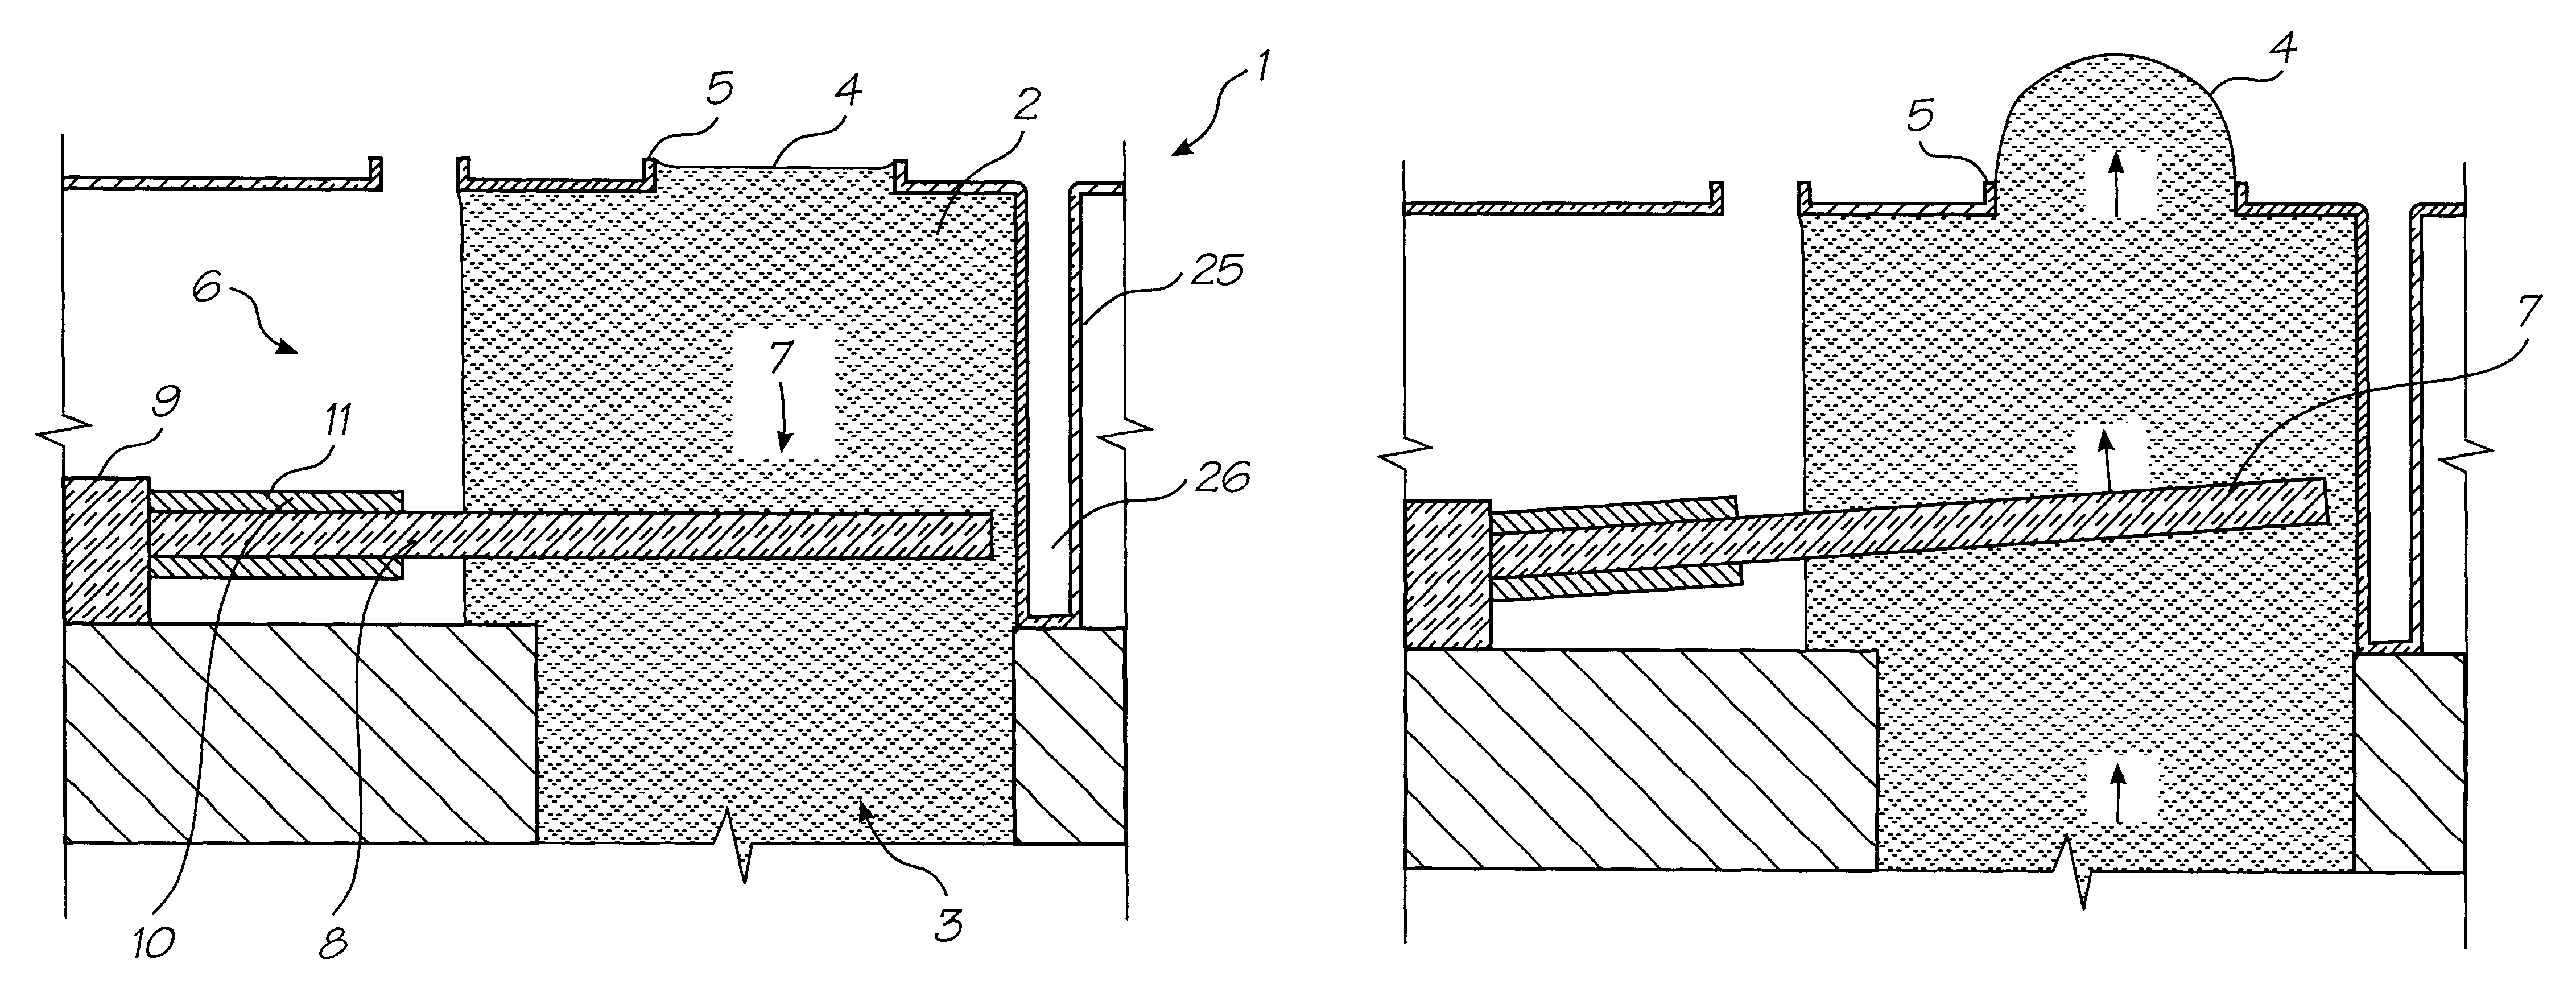 Ink jet printhead having thermal bend actuator heating element electrically isolated from nozzle chamber ink